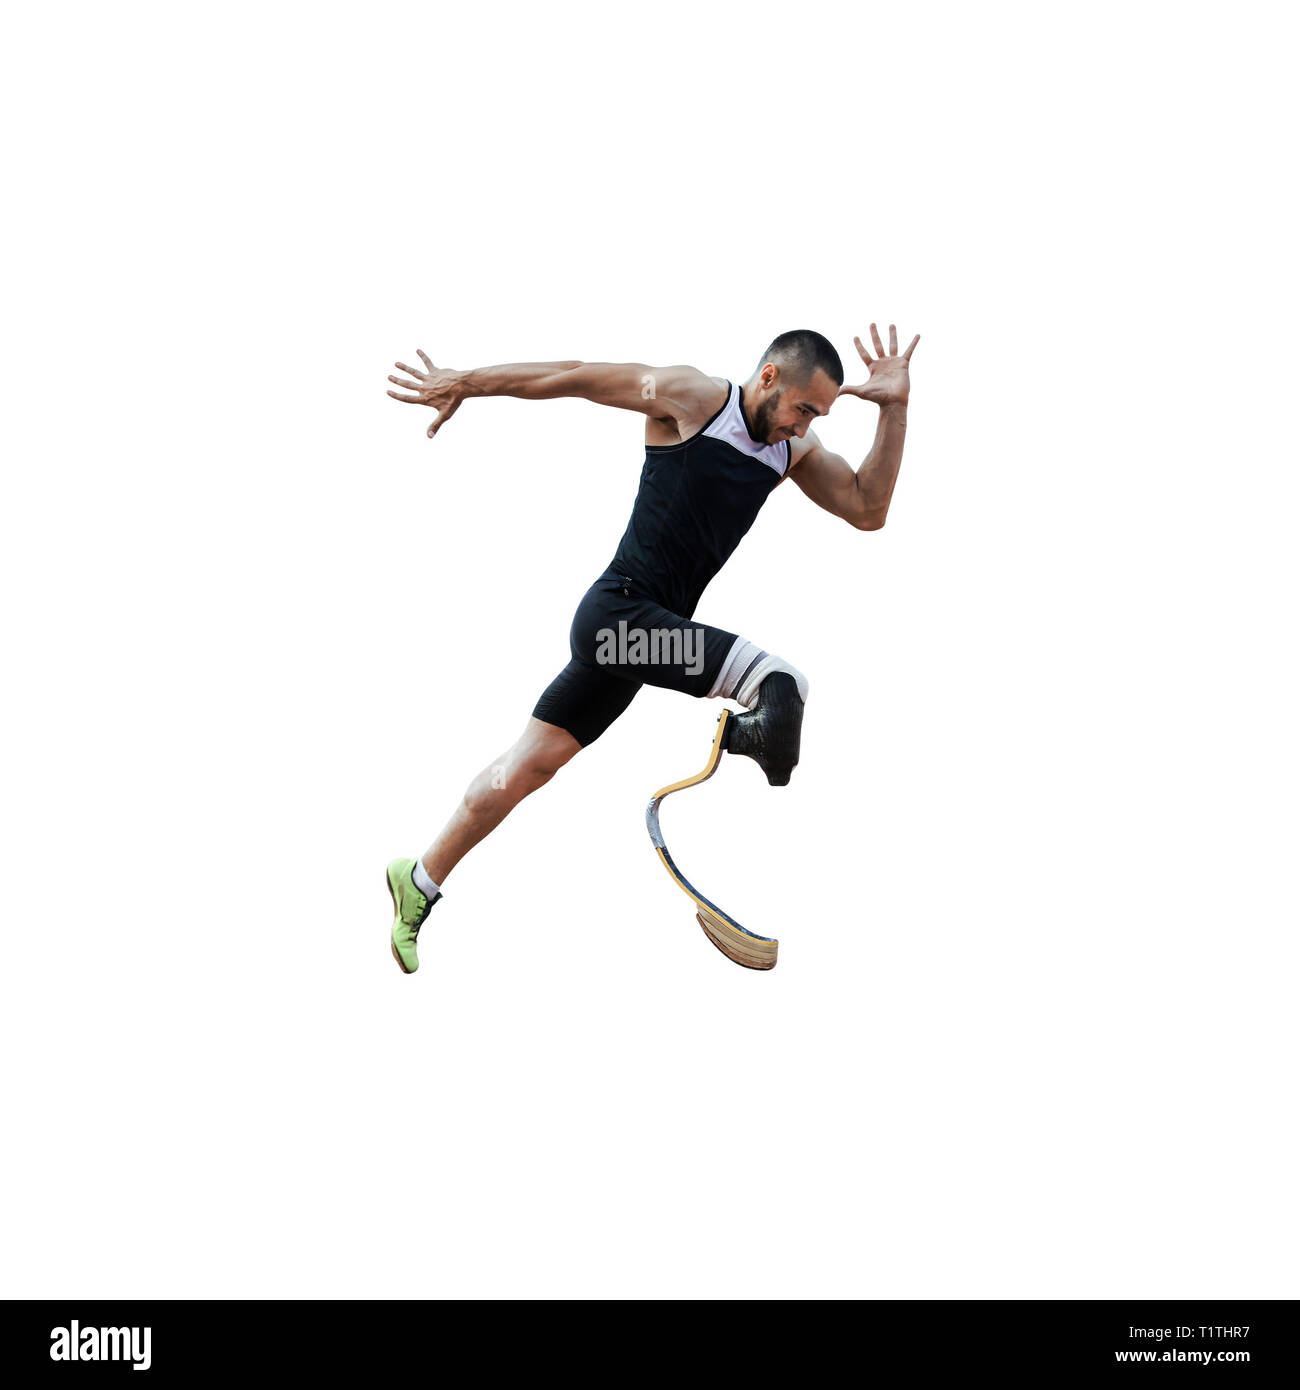 athlete runner disabled amputee explosive start to running isolated Stock Photo